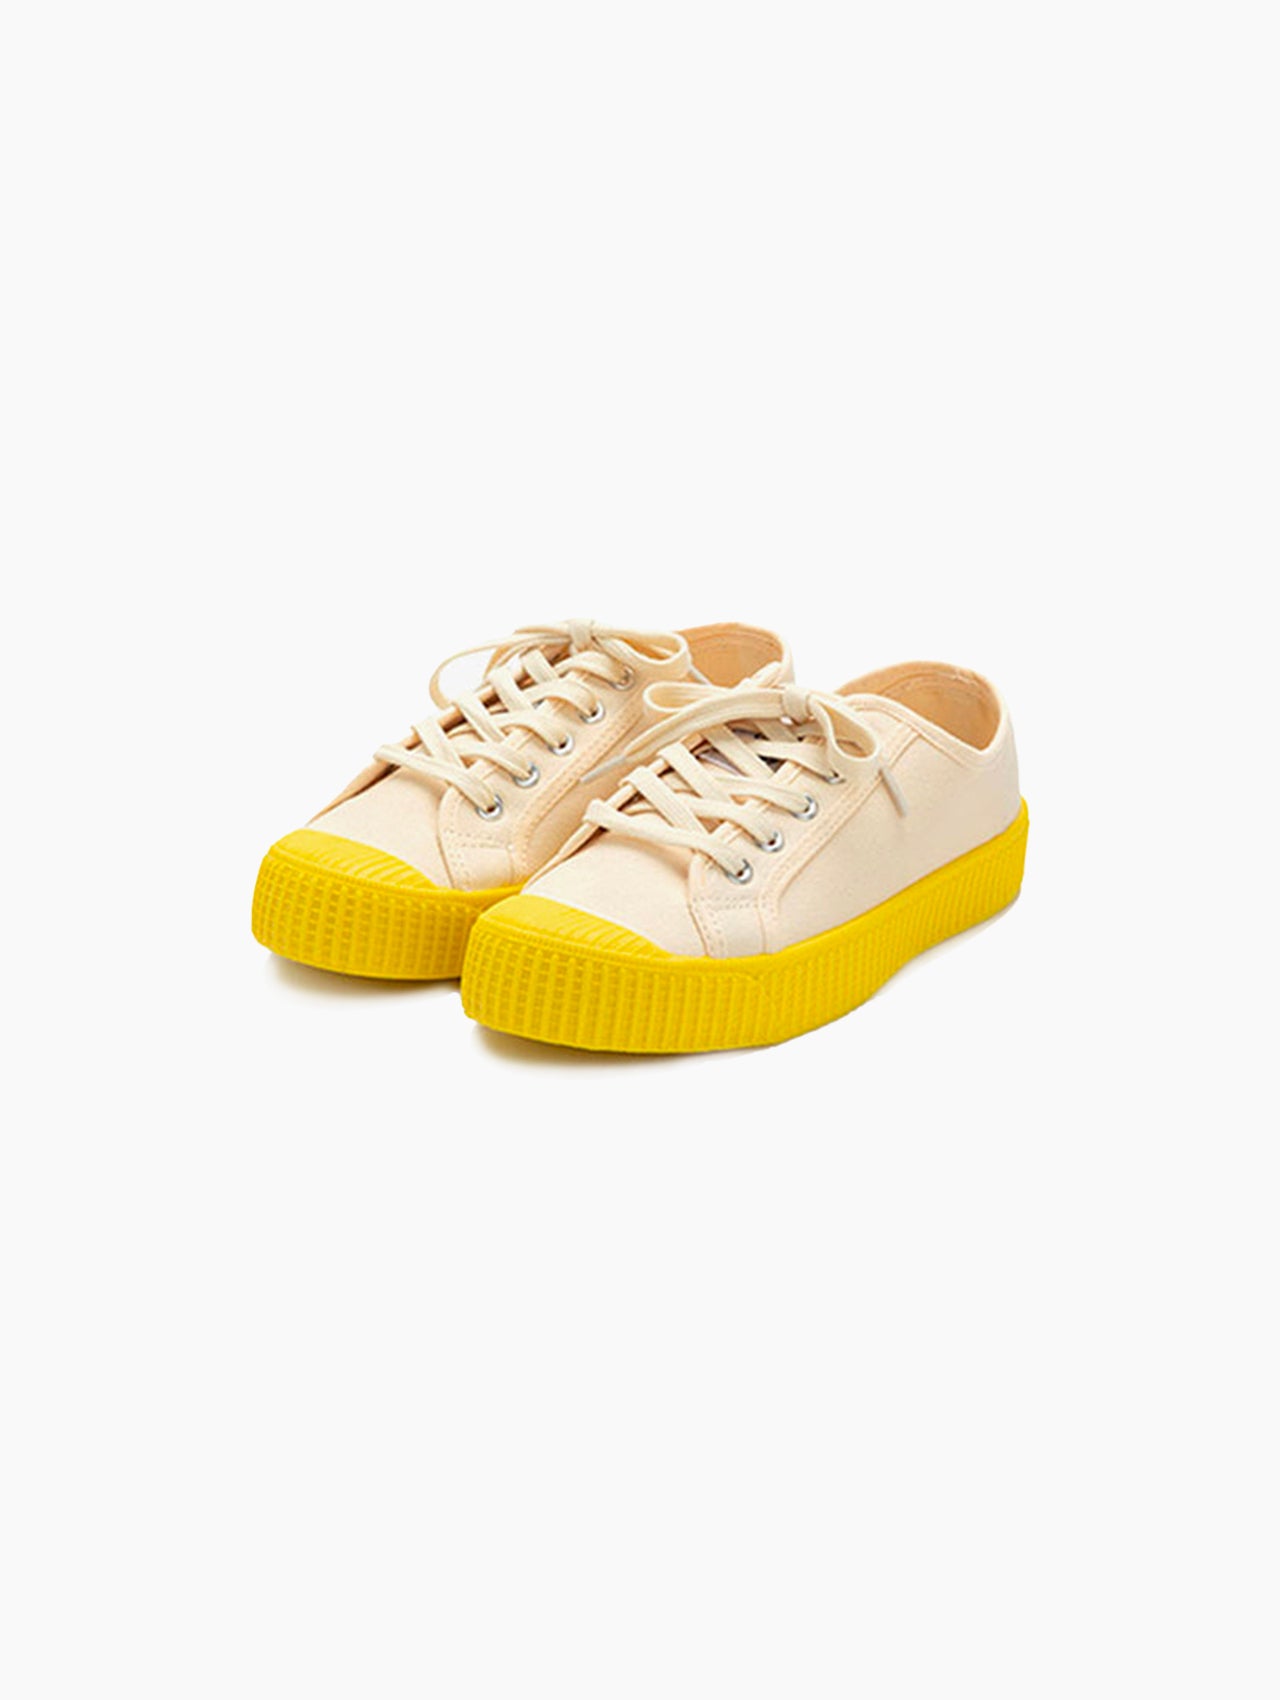 Adult Colorful Sole Canvas Sneaker